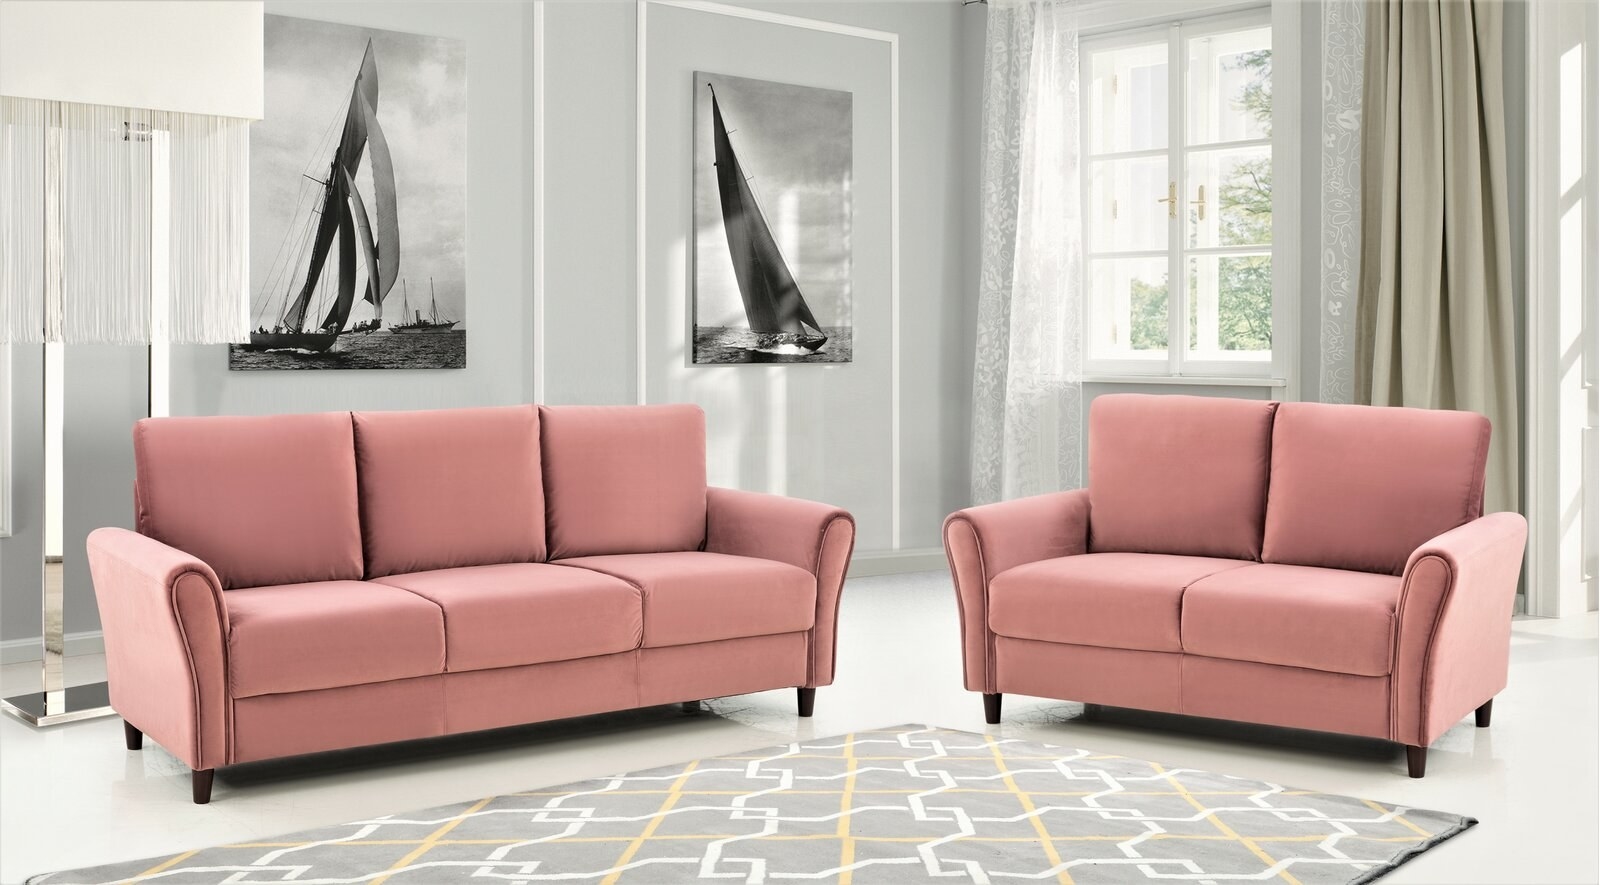 Two pink velvet couches around a gray, yellow, and white rug